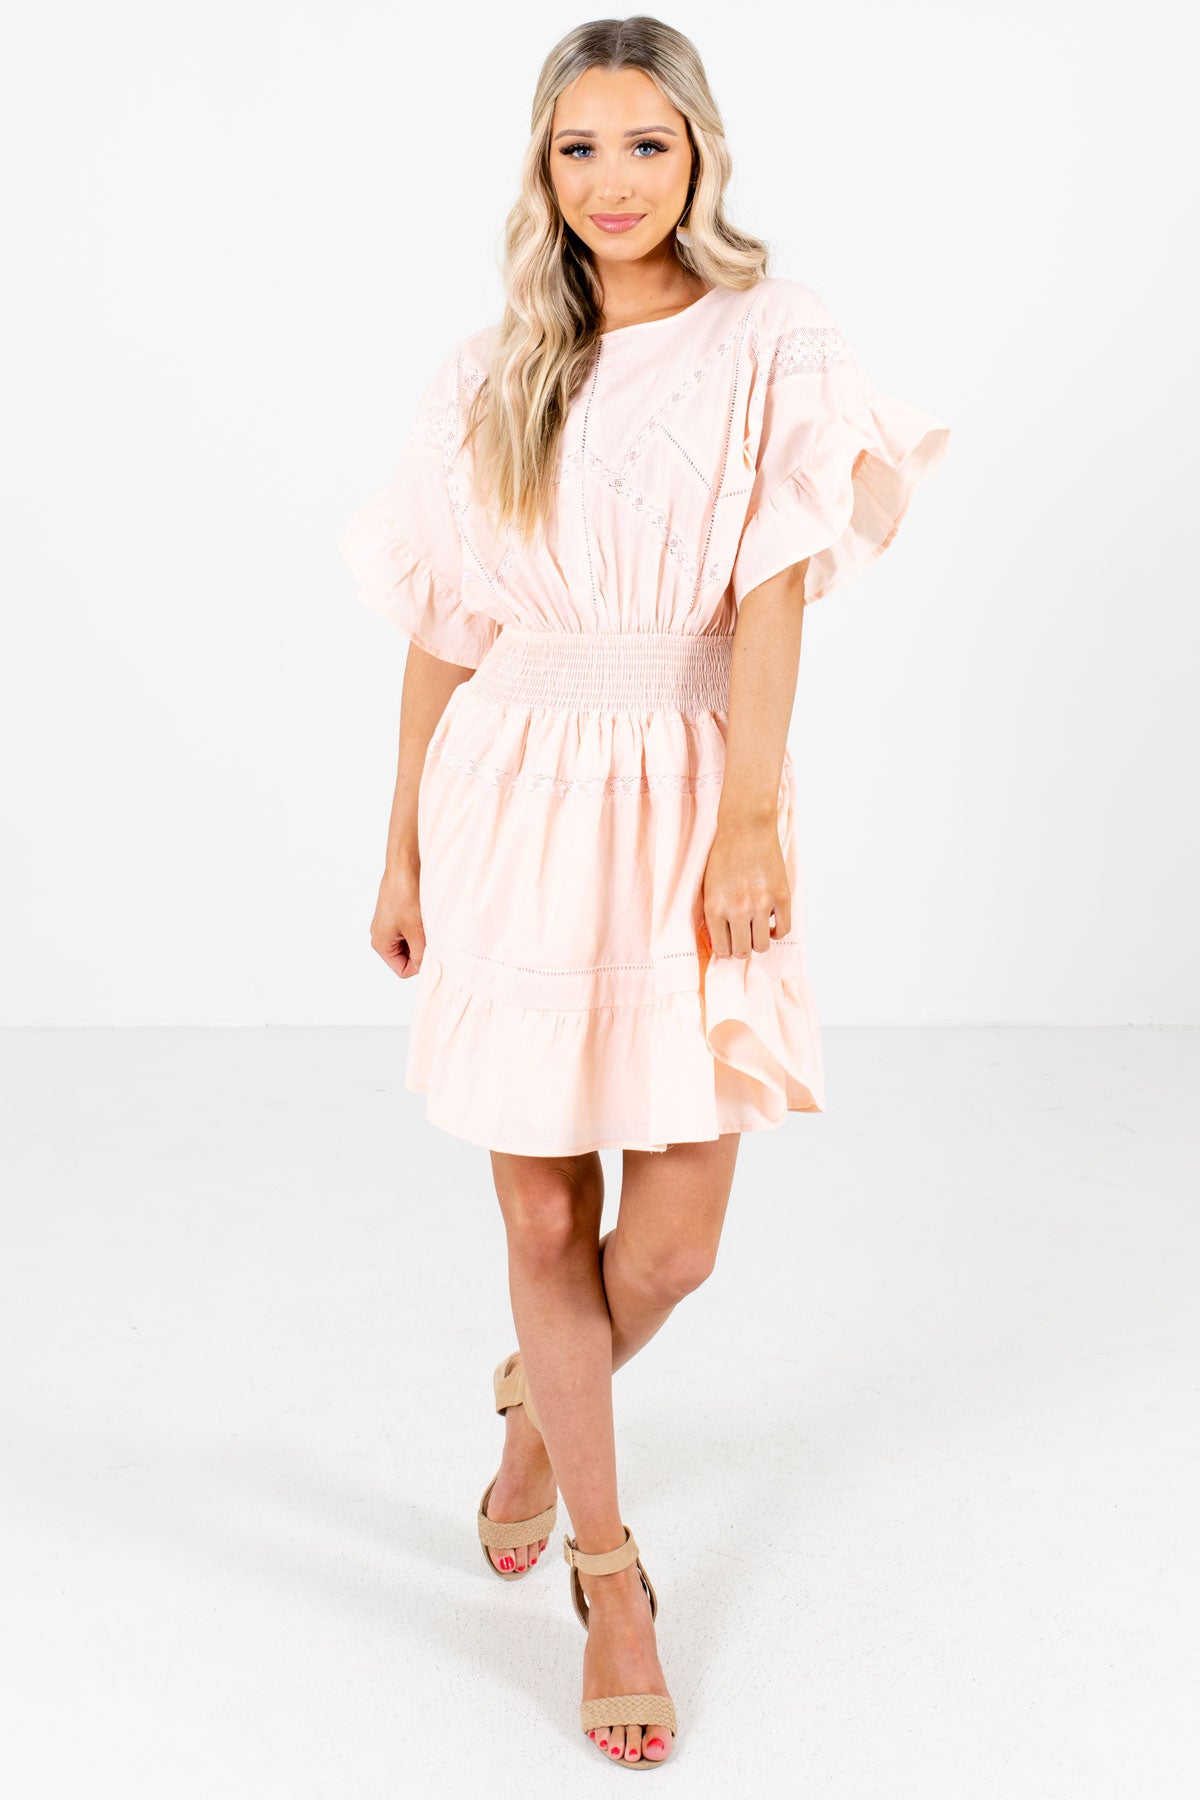 Light Pink Cute and Comfortable Boutique Mini Dresses for Women